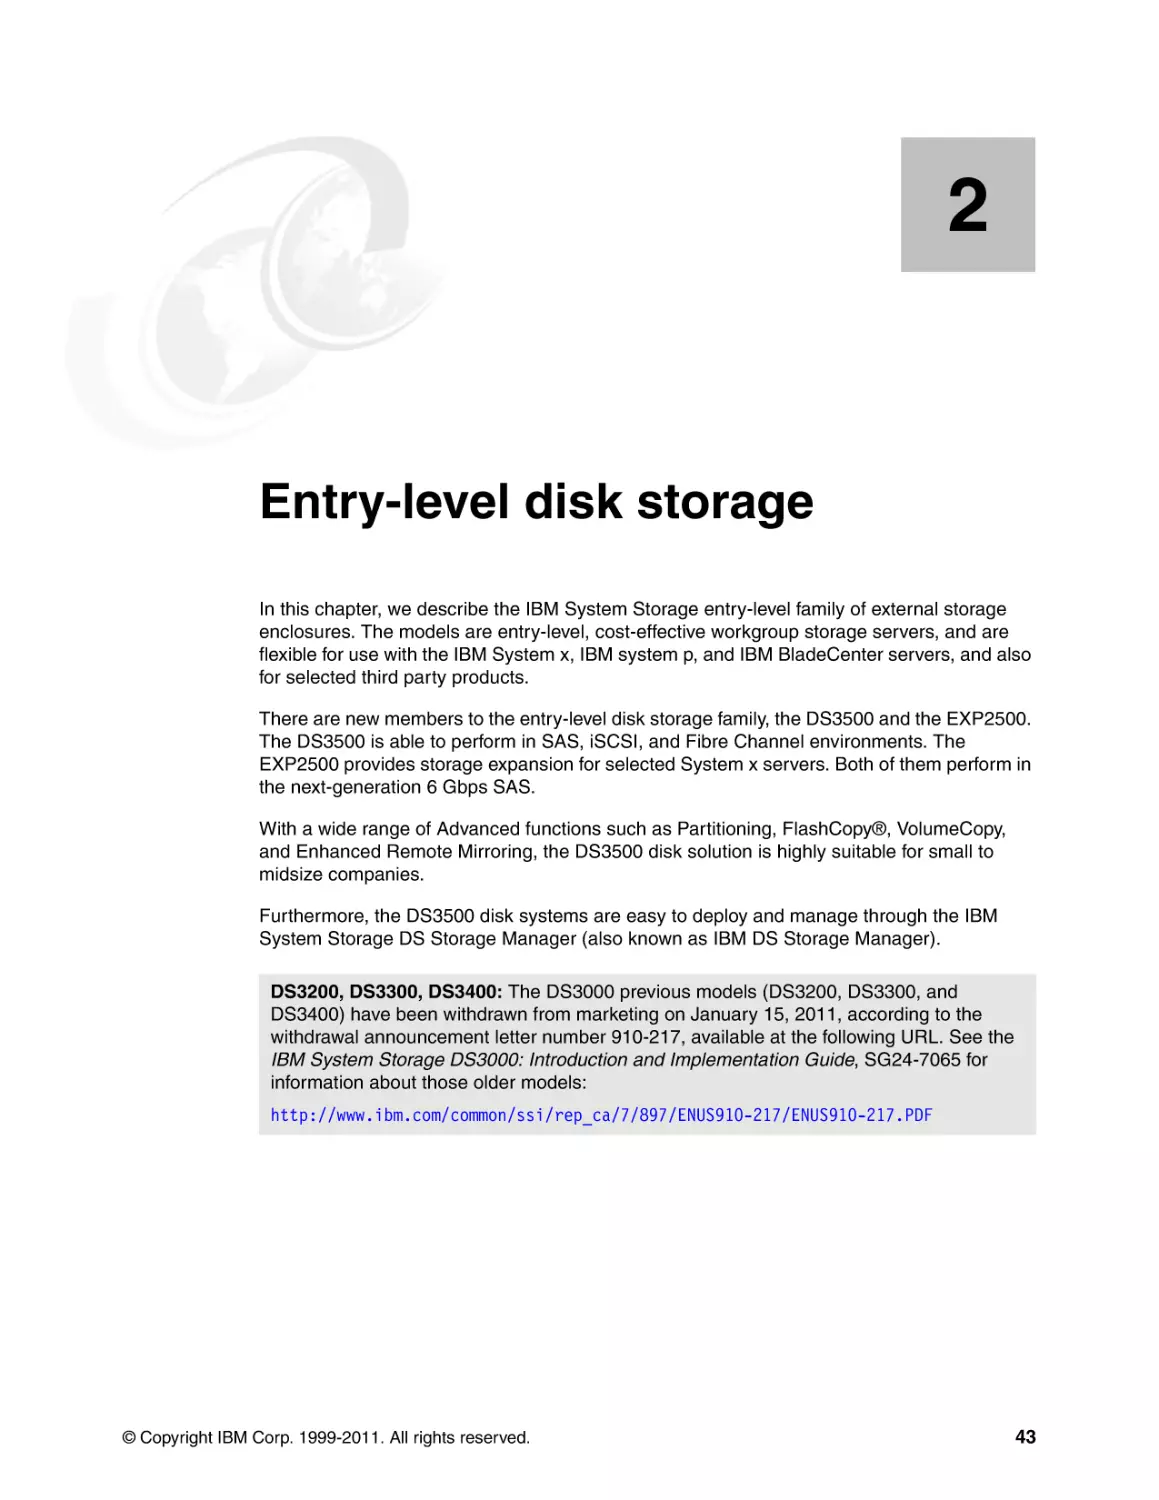 Chapter 2. Entry-level disk storage